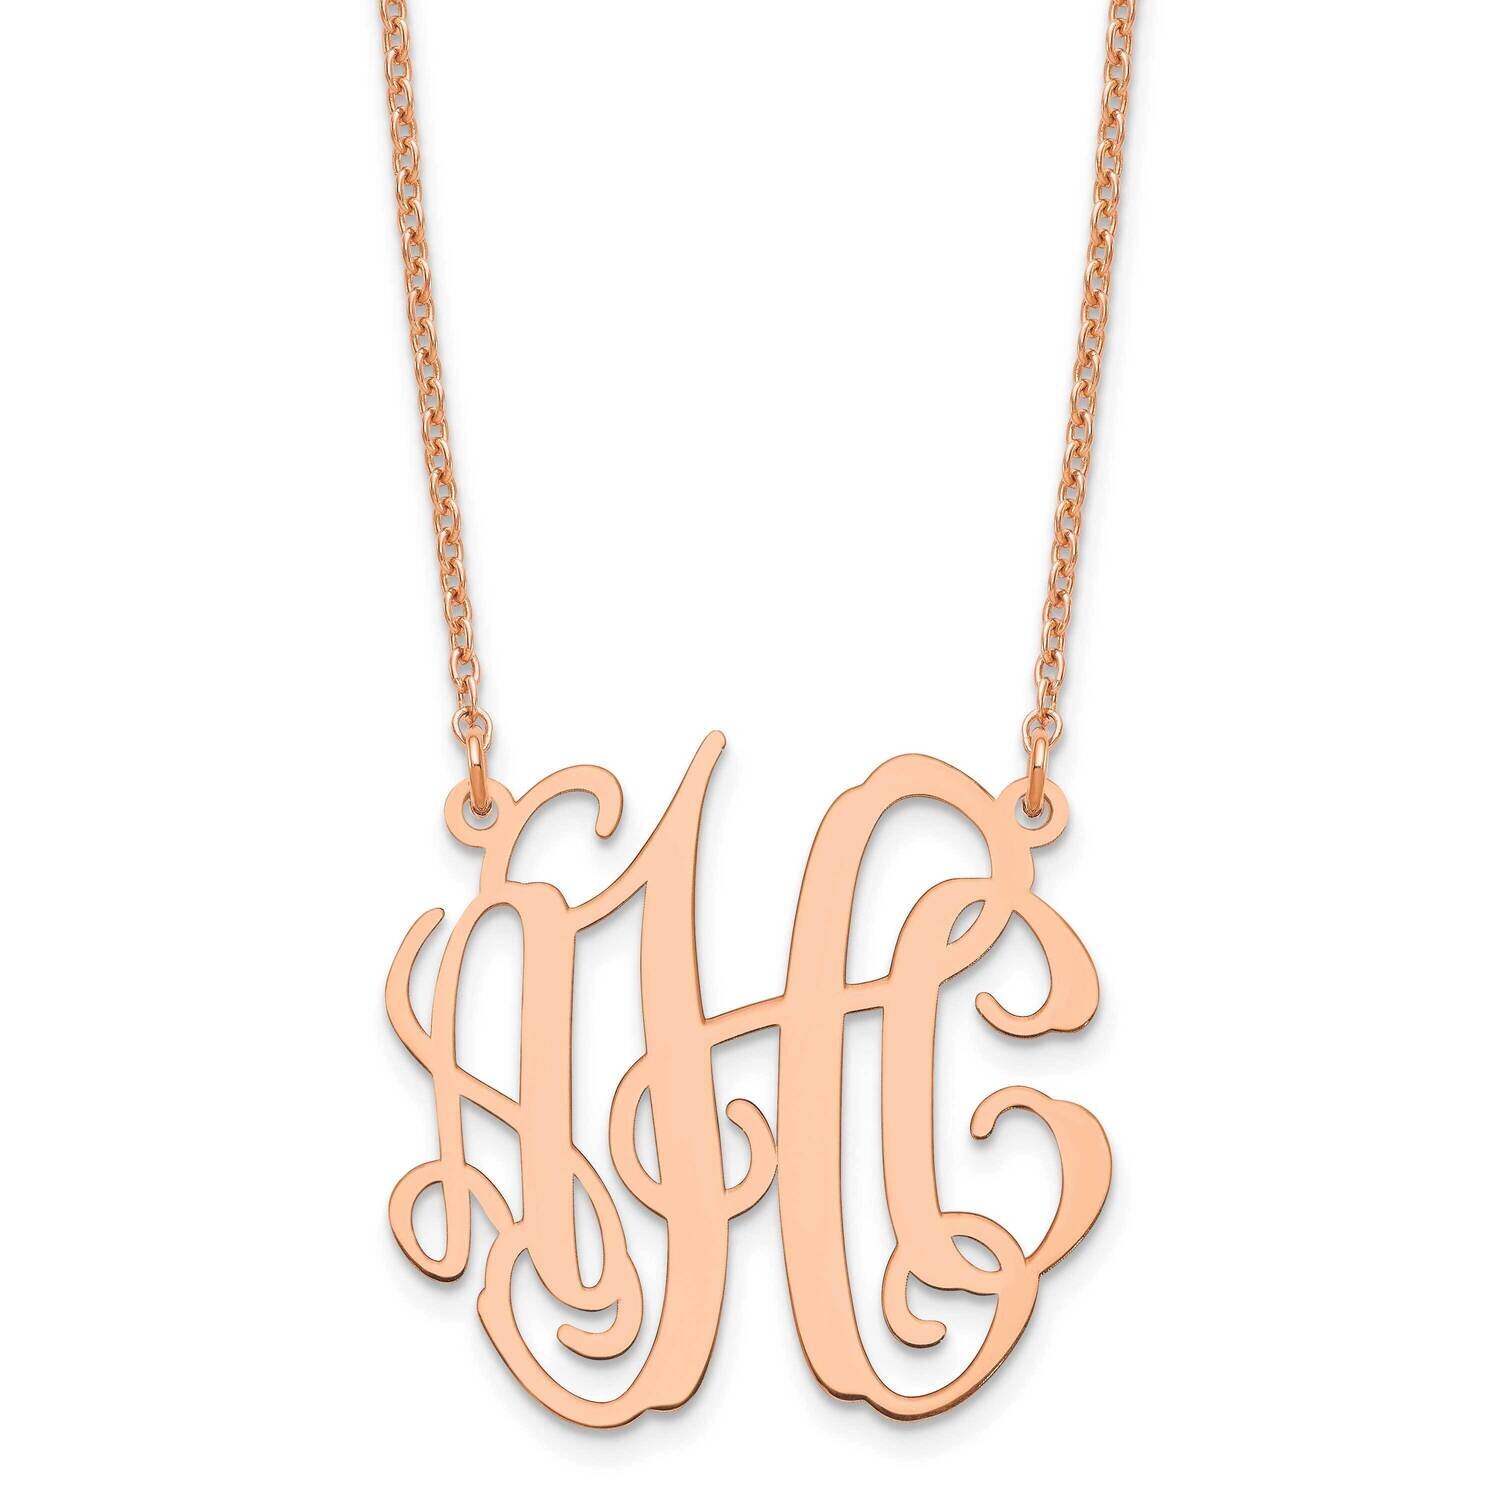 Small Polished Monogram Necklace Sterling Silver Rose-plated XNA547RP